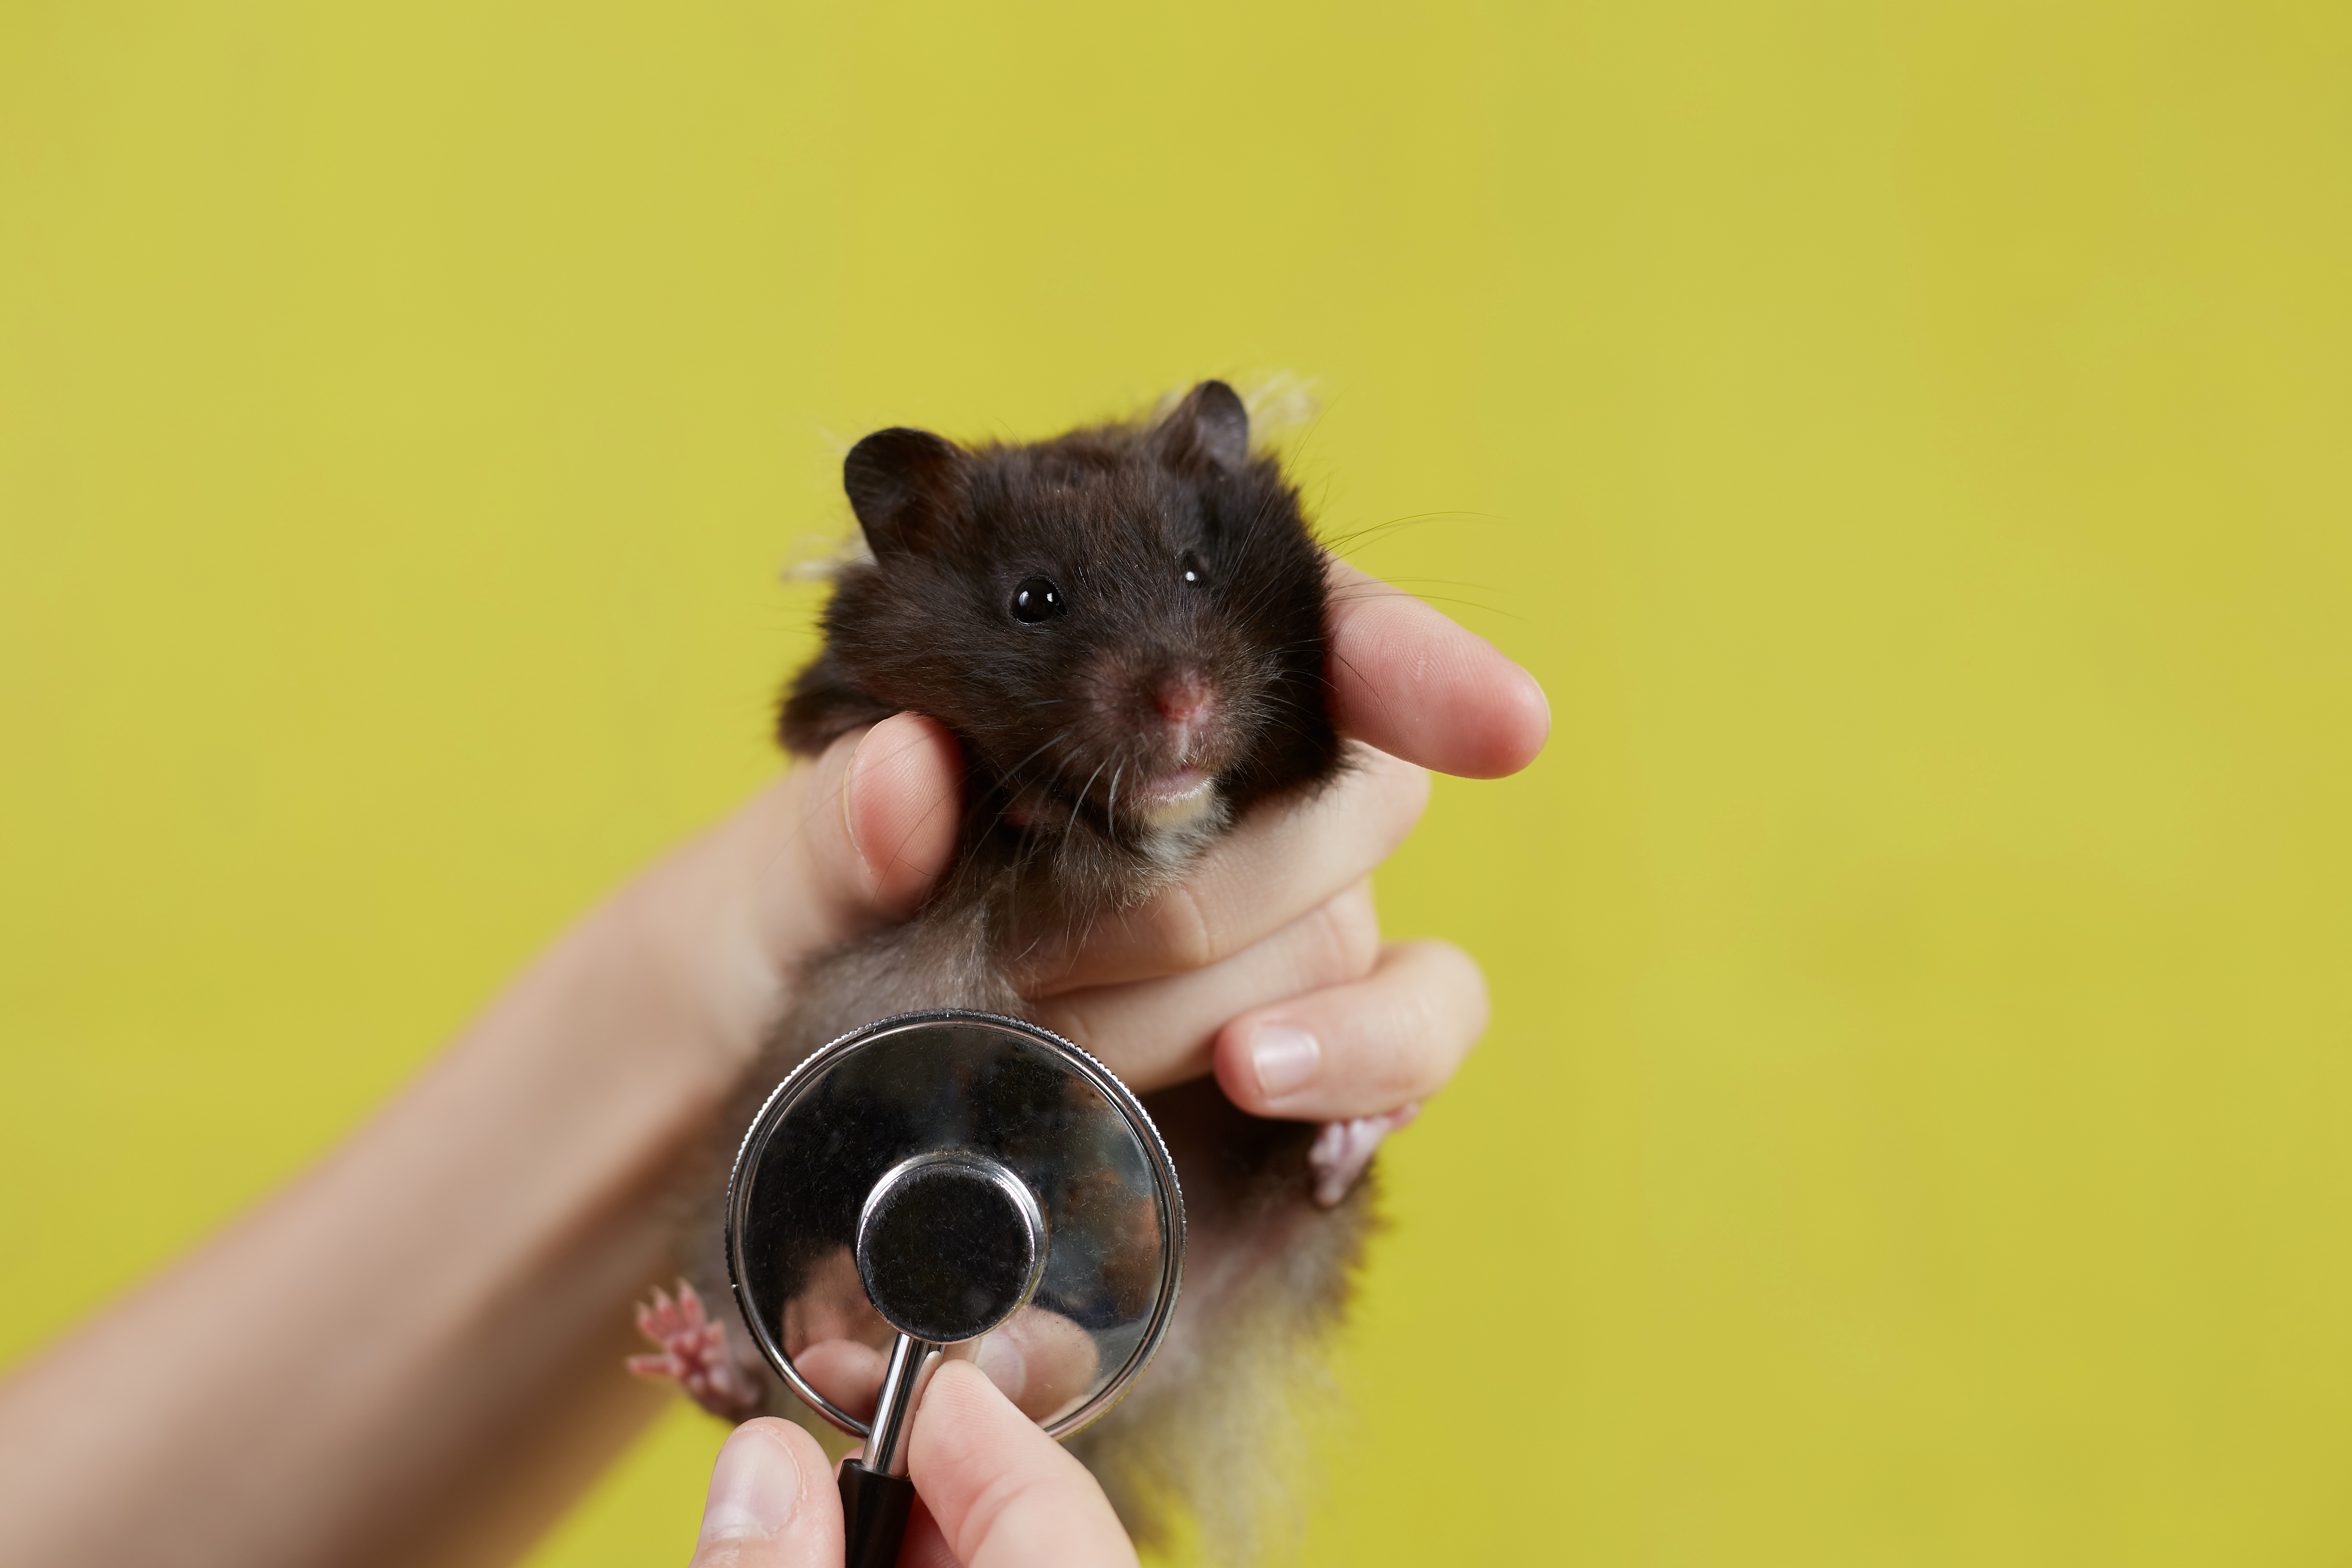 What is the Life Expectancy of a Dwarf Hamster: 9 Dynamic Power